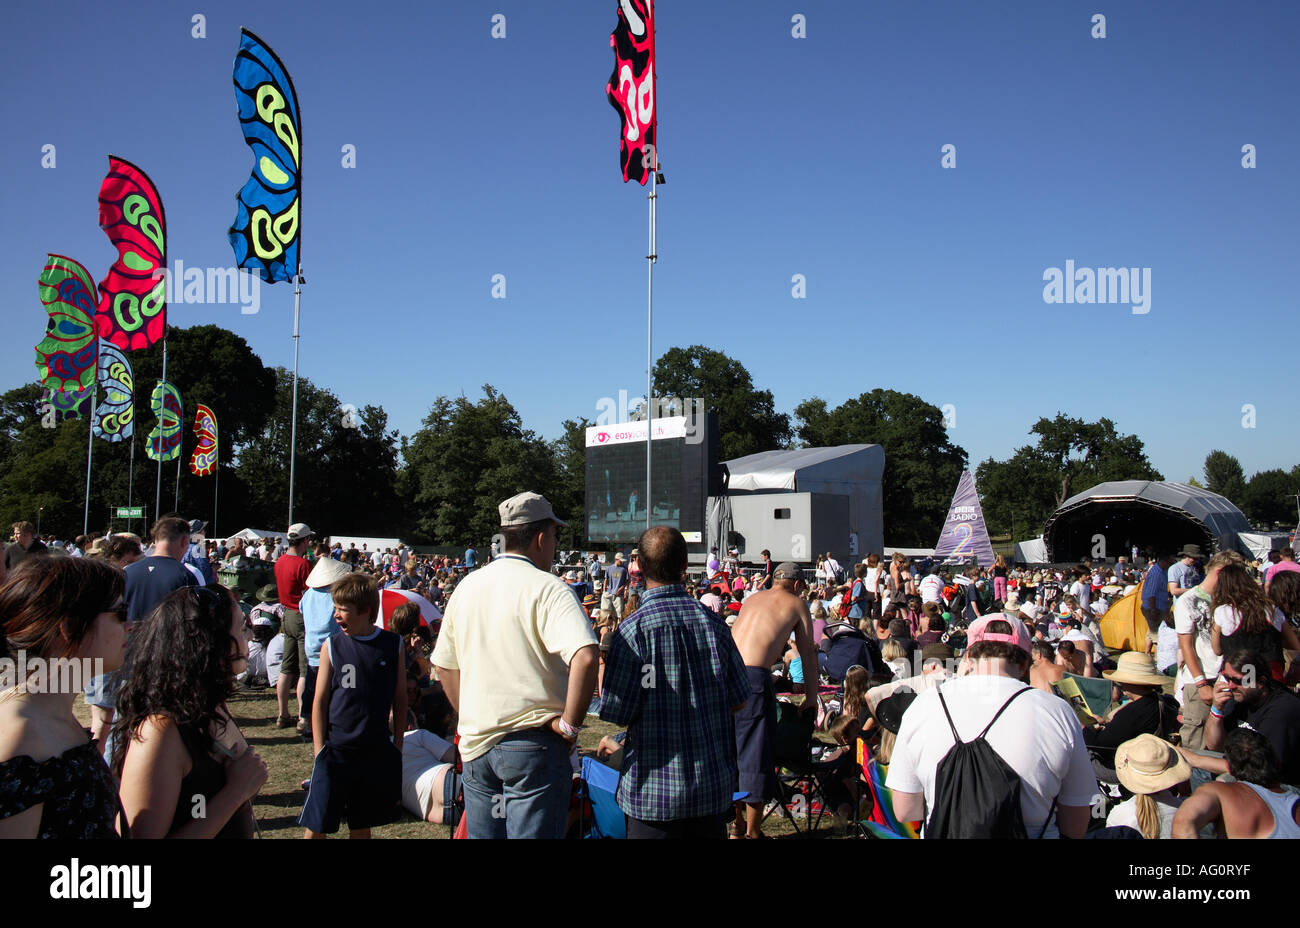 Audience and banners at Guilfest Music Festival. Guildford, Surrey, England Stock Photo